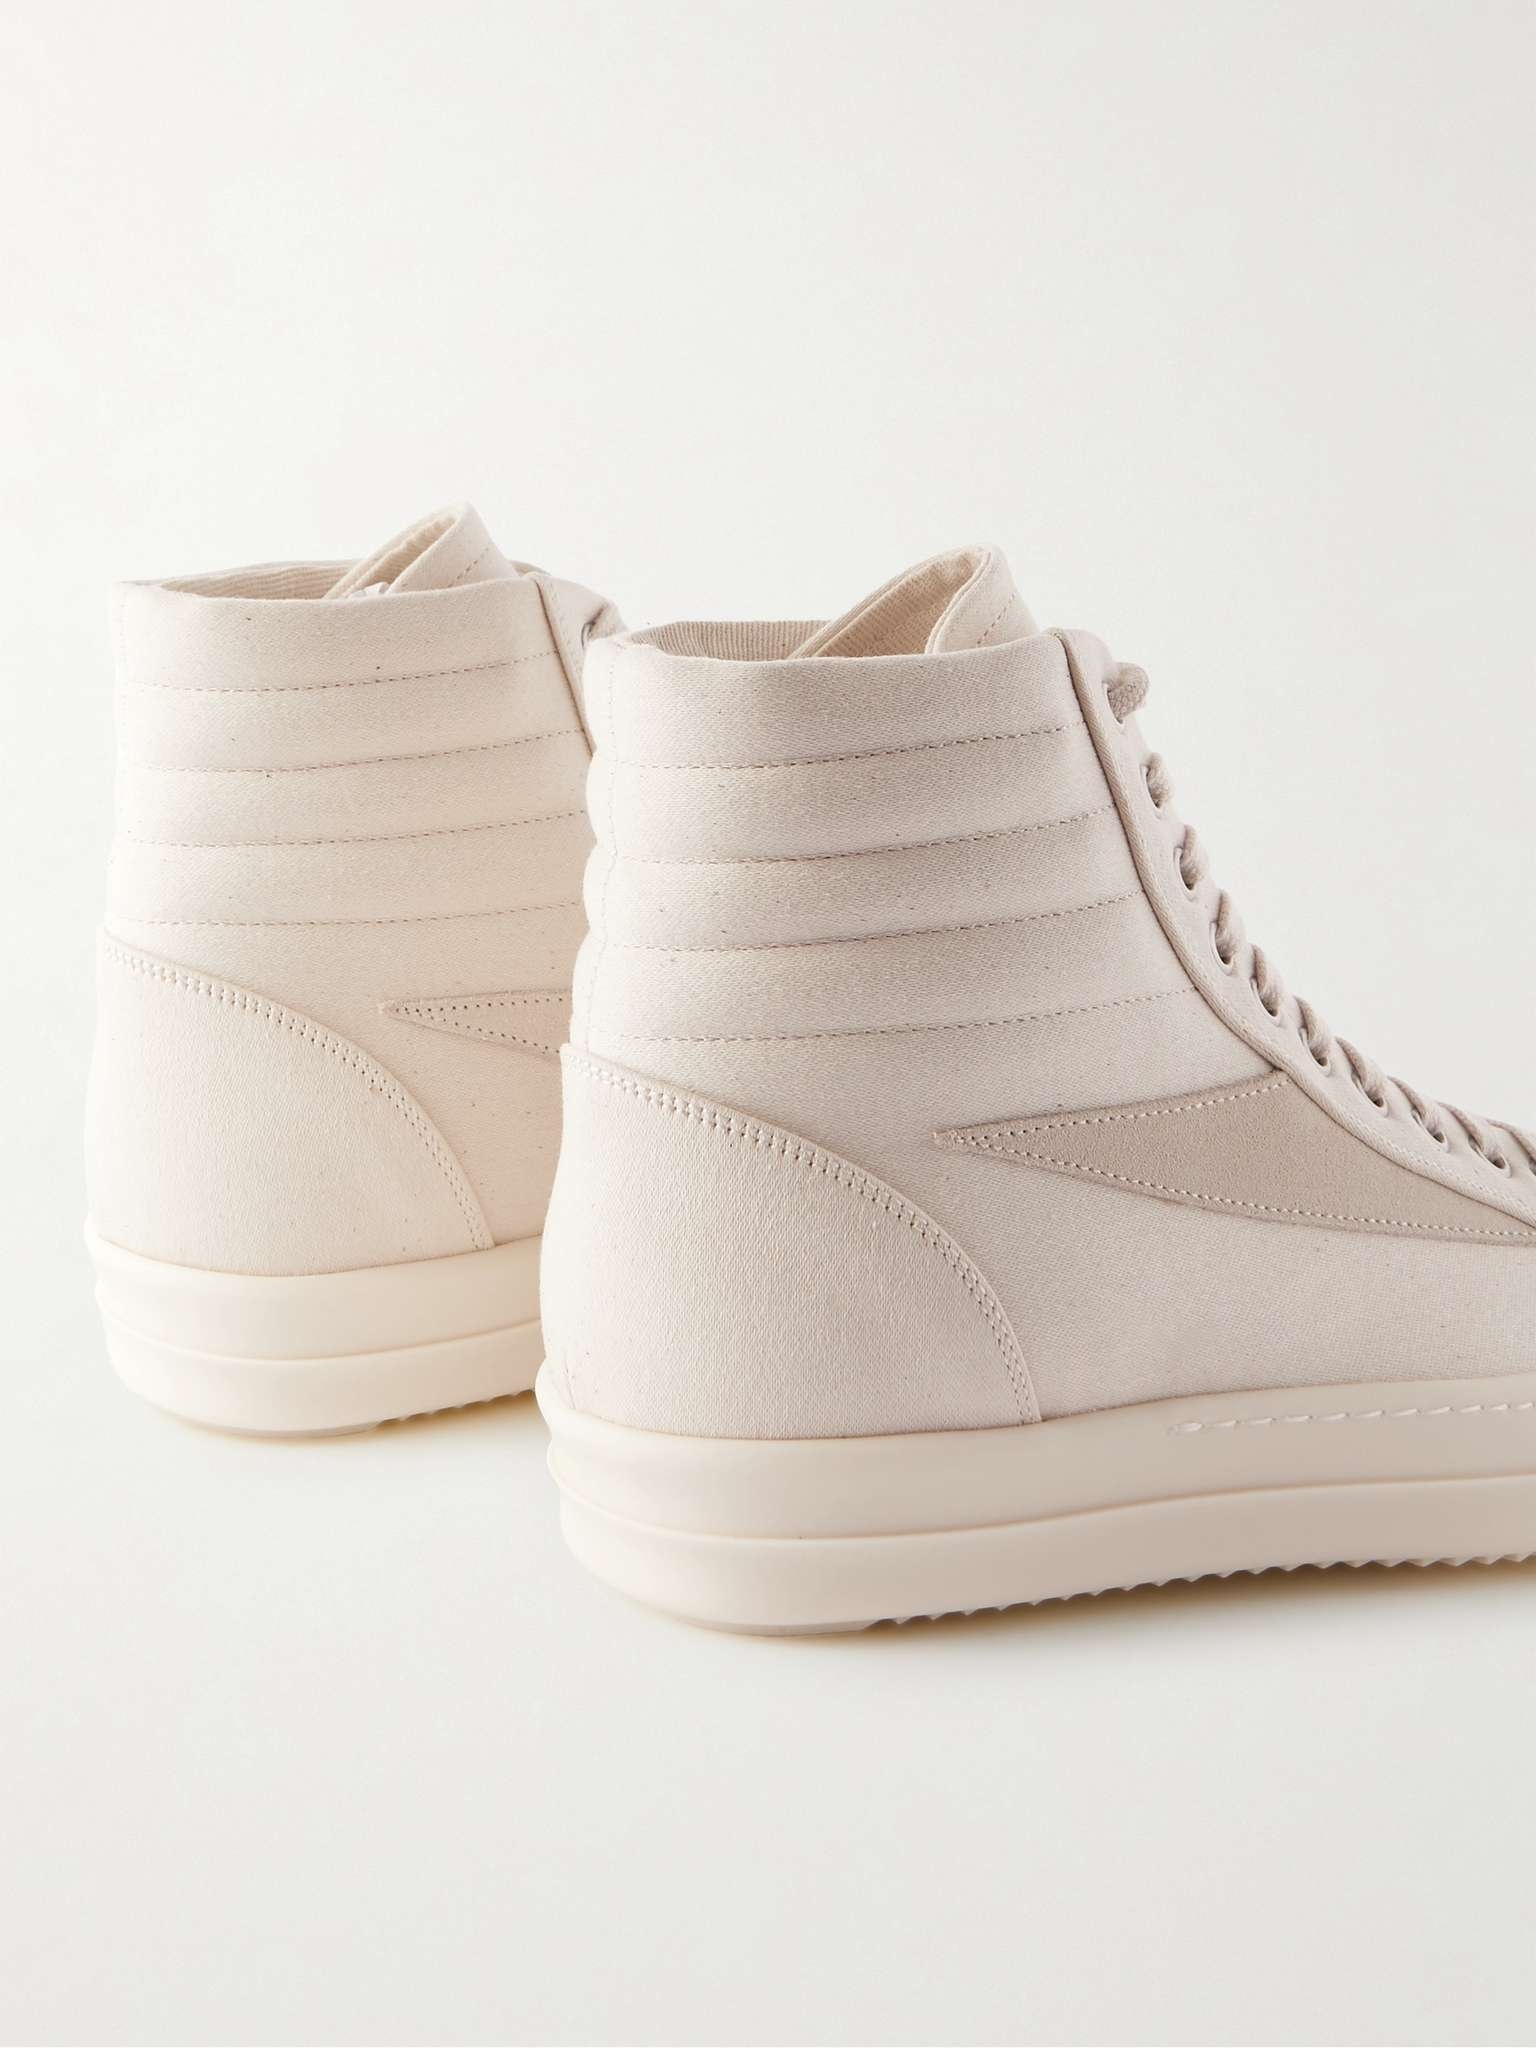 Vintage Suede-Trimmed Canvas High-Top Sneakers - 5